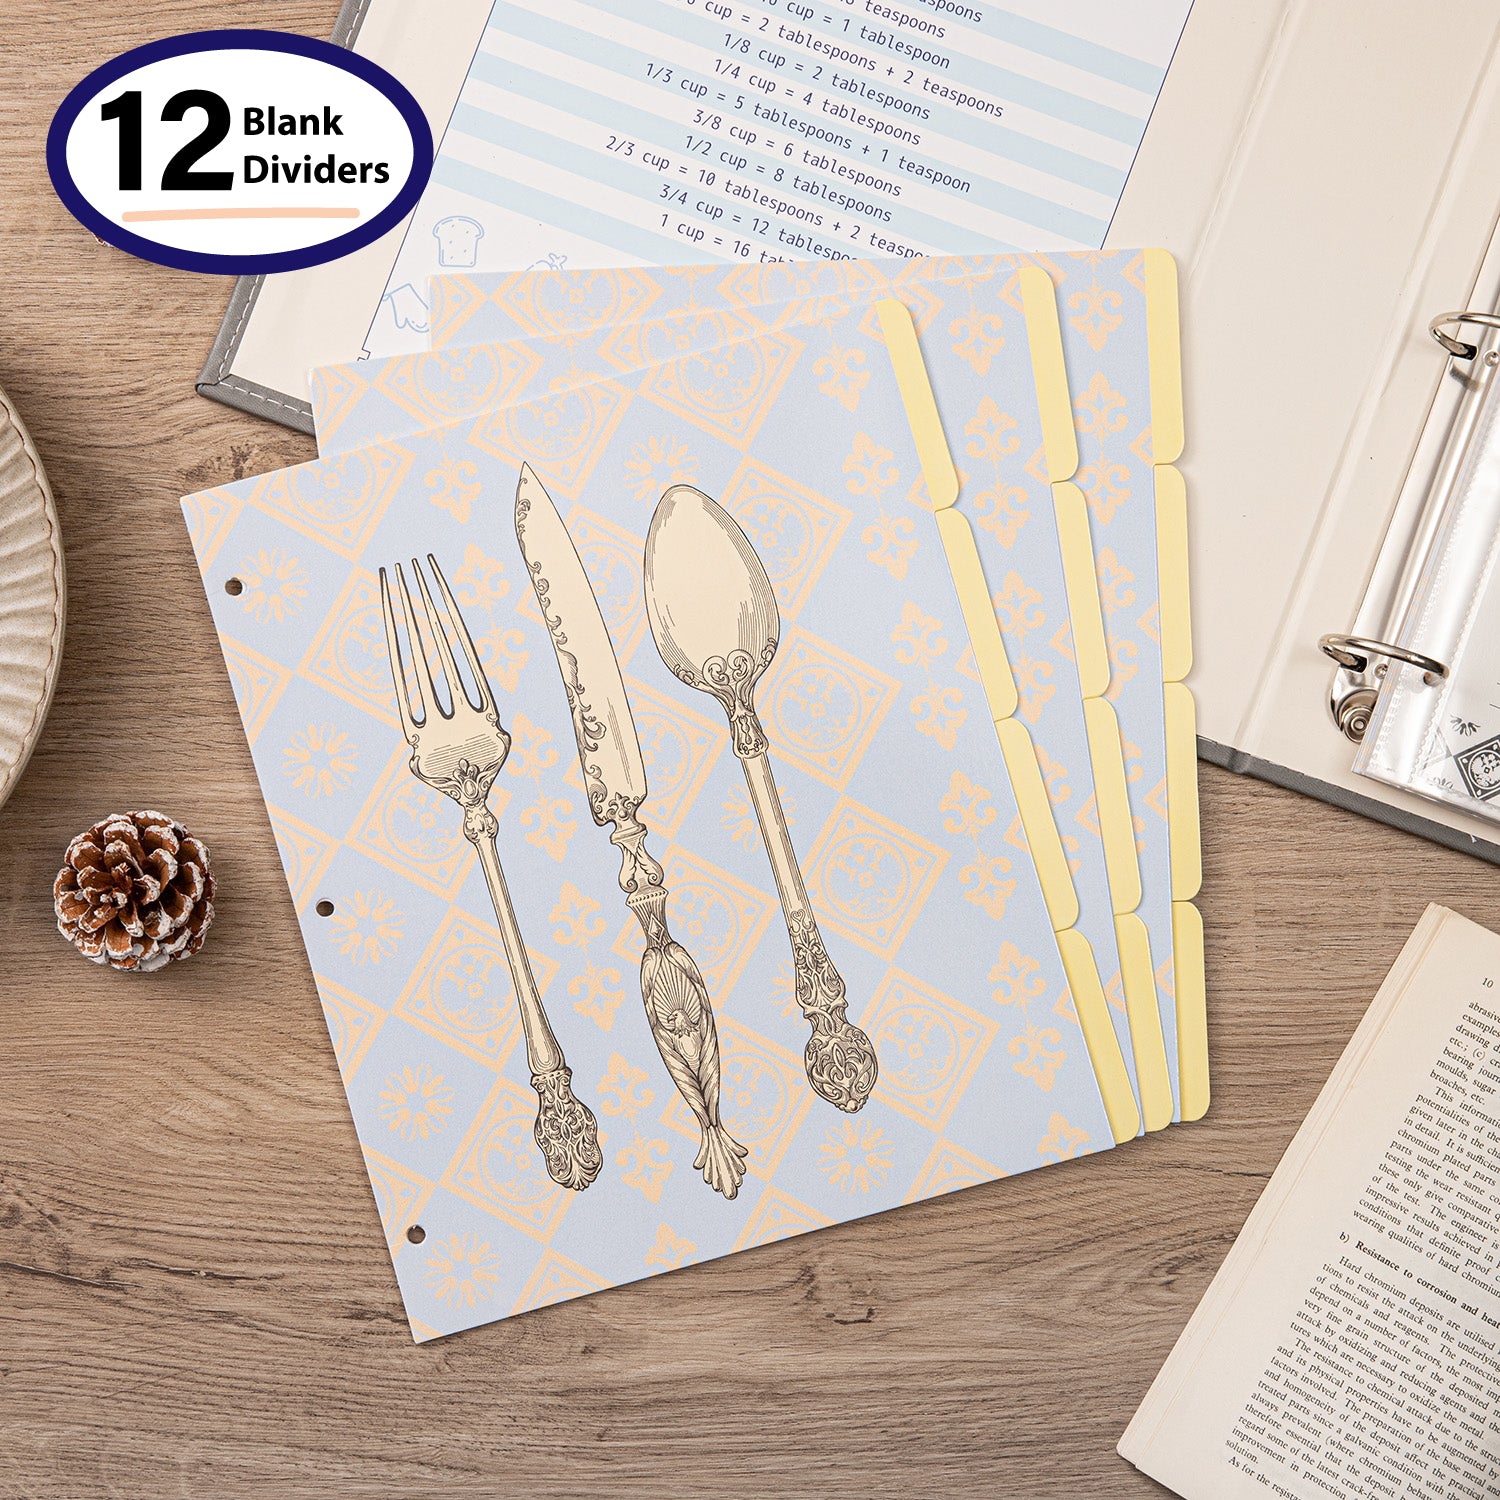 Make Your Own Recipe Binder: Scrapbook Style - Now That's Thrifty!